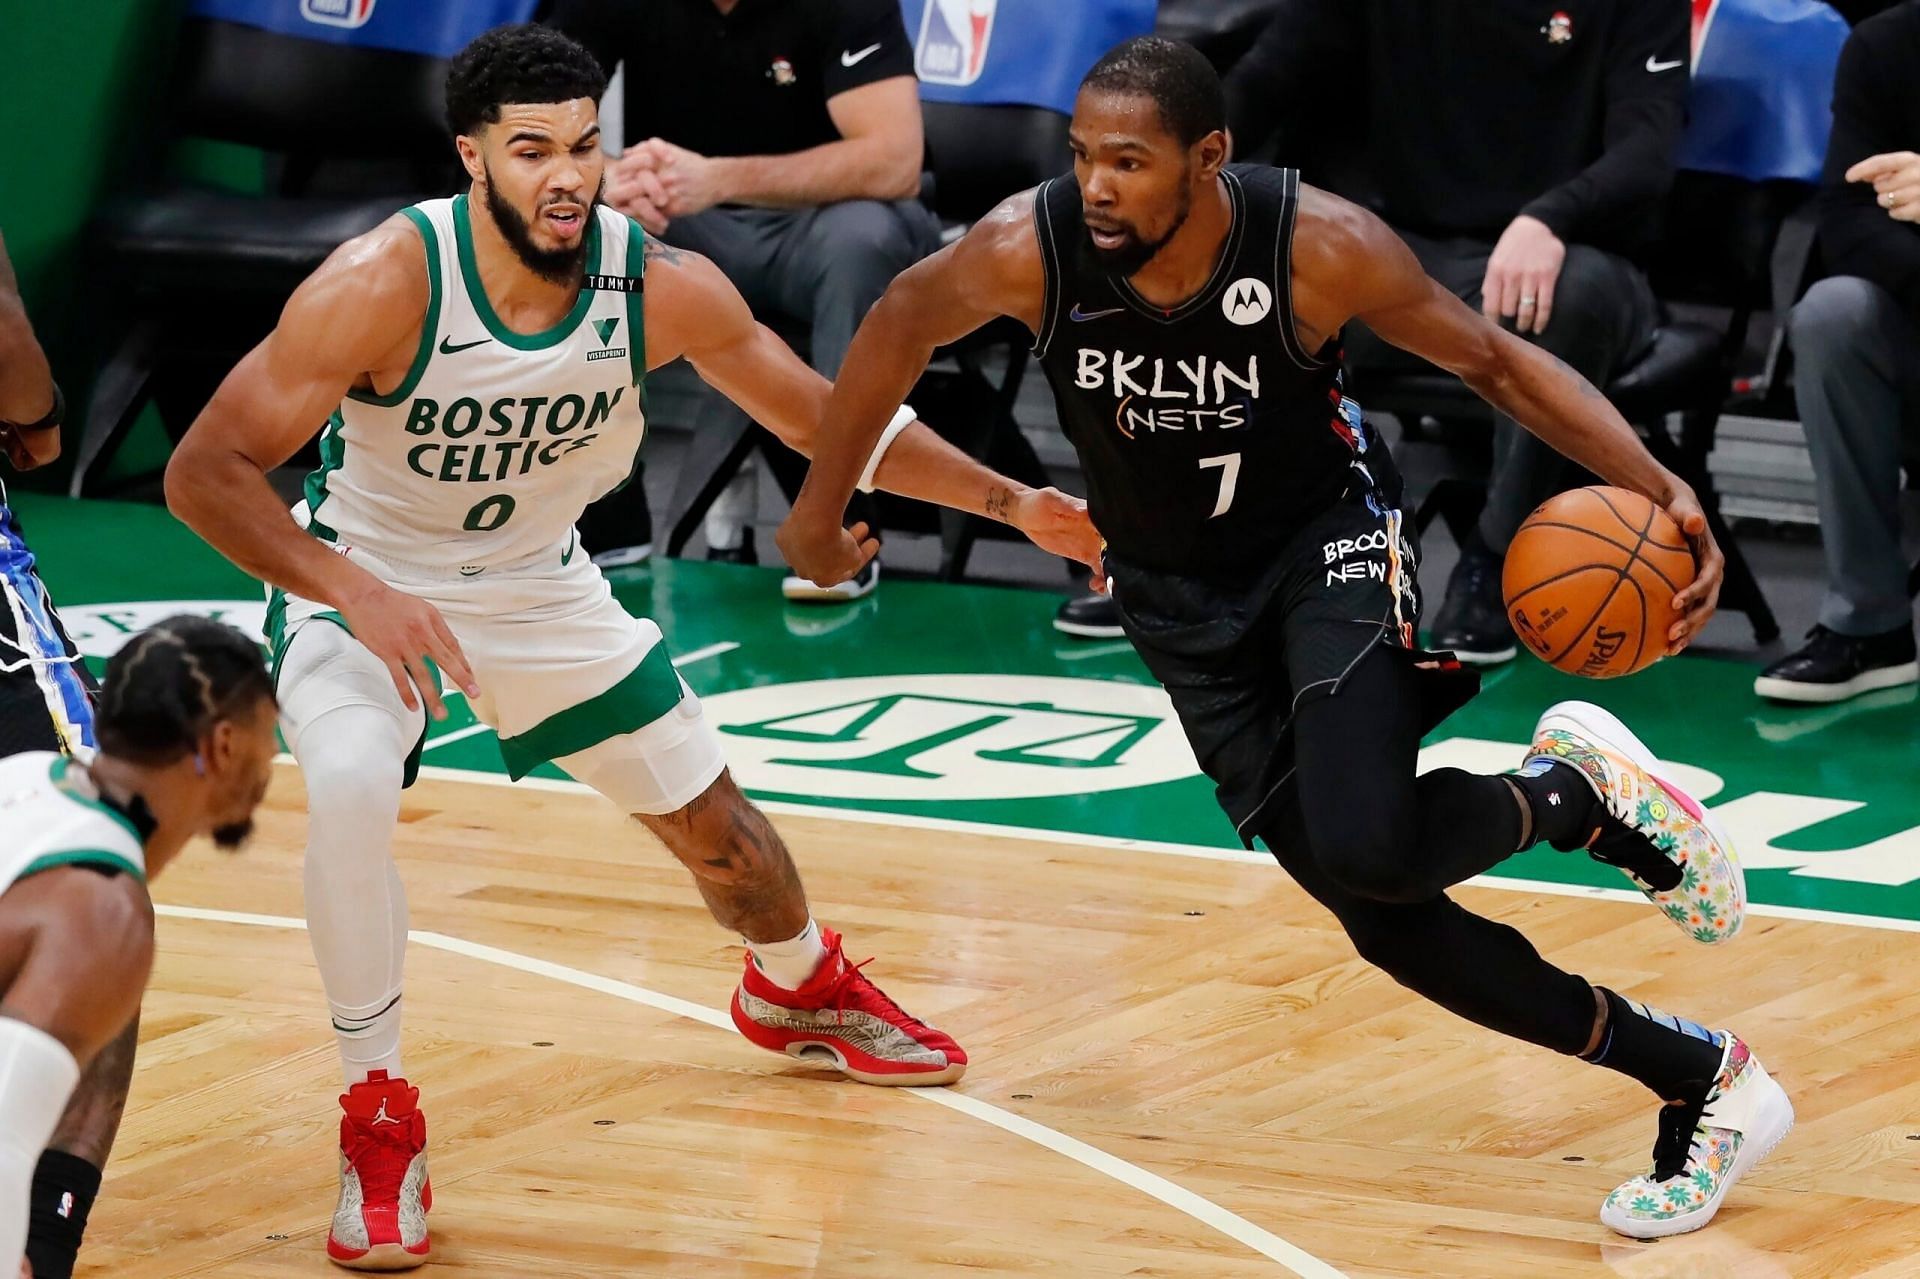 The visiting Boston Celtics are looking to get even with the Brooklyn Nets on Tuesday. [Photo: Boston.com]